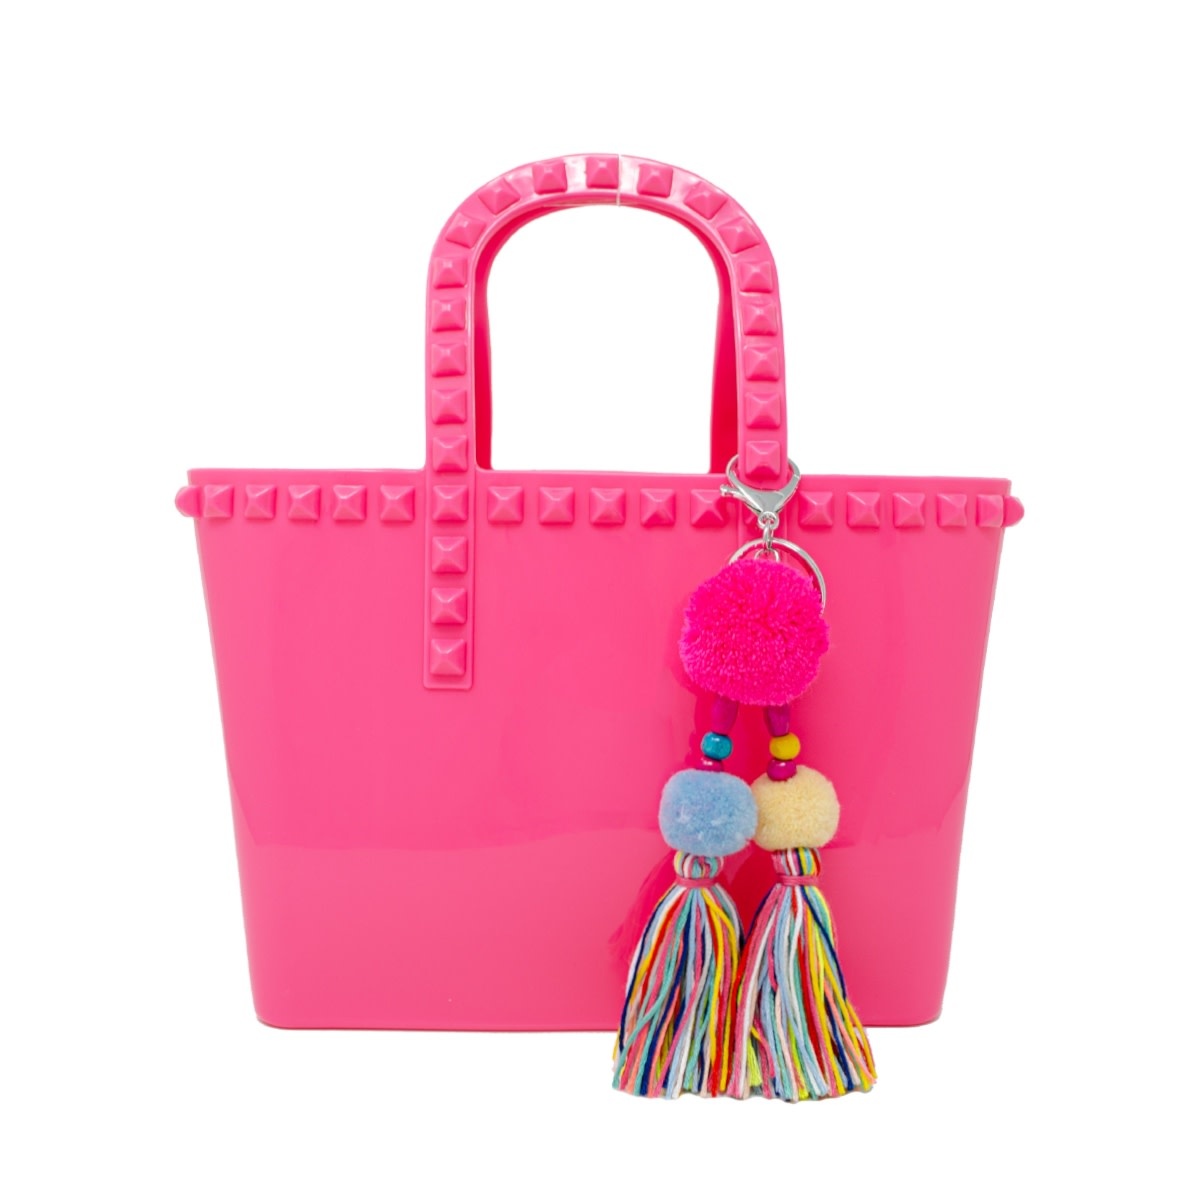 Tiny Jelly Tote Bag Hot Pink